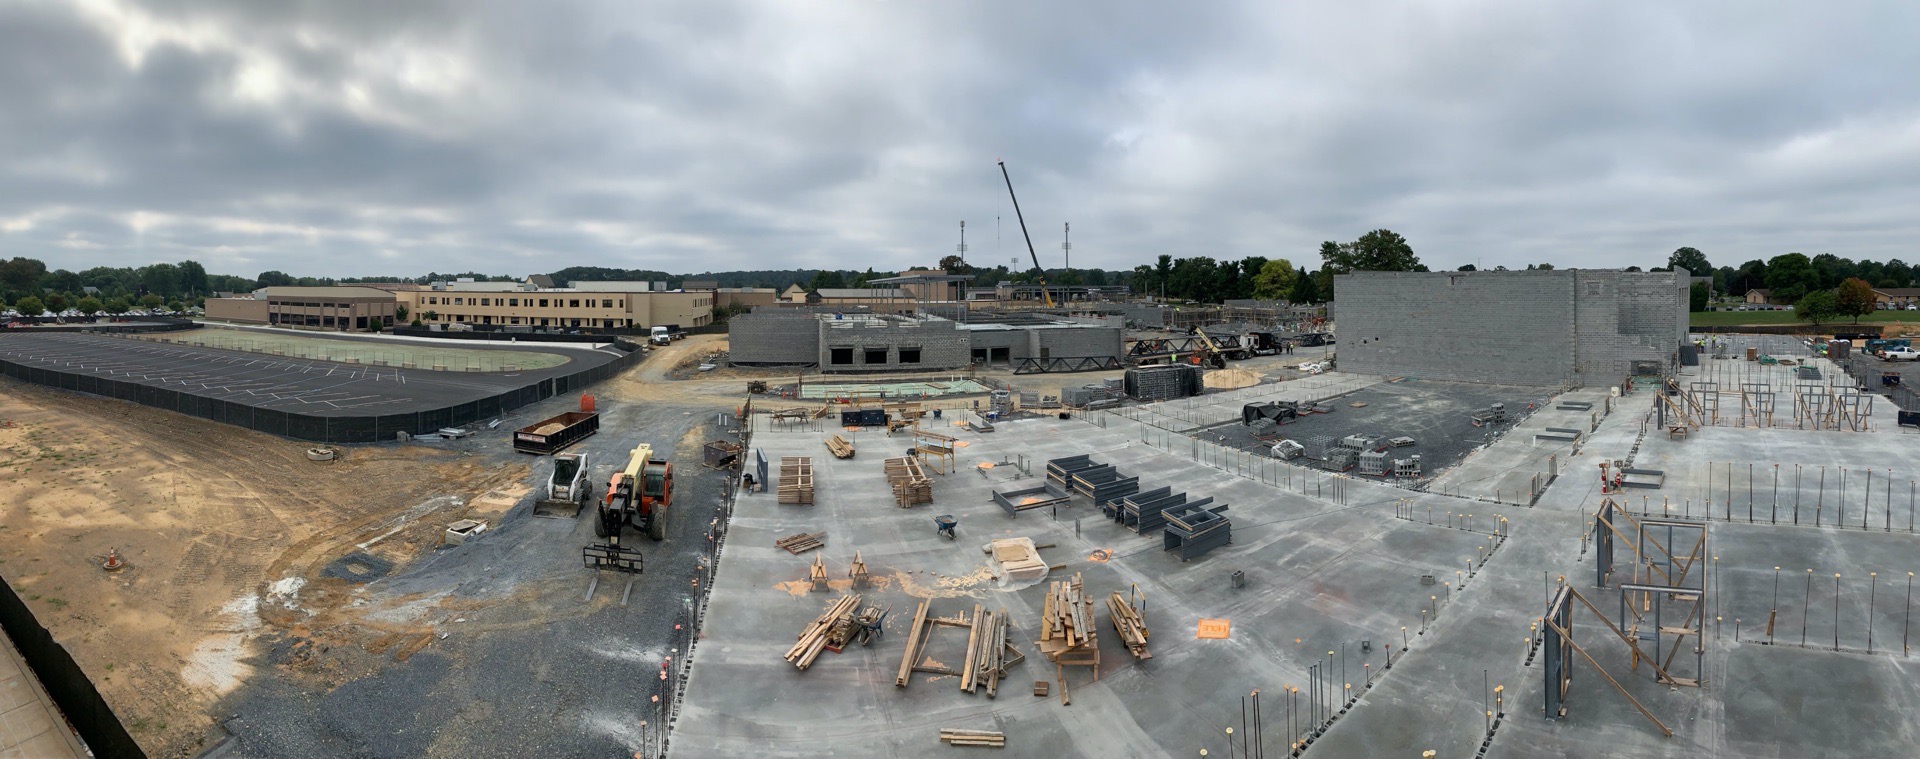 Middle School Construction Site - September 11, 2019